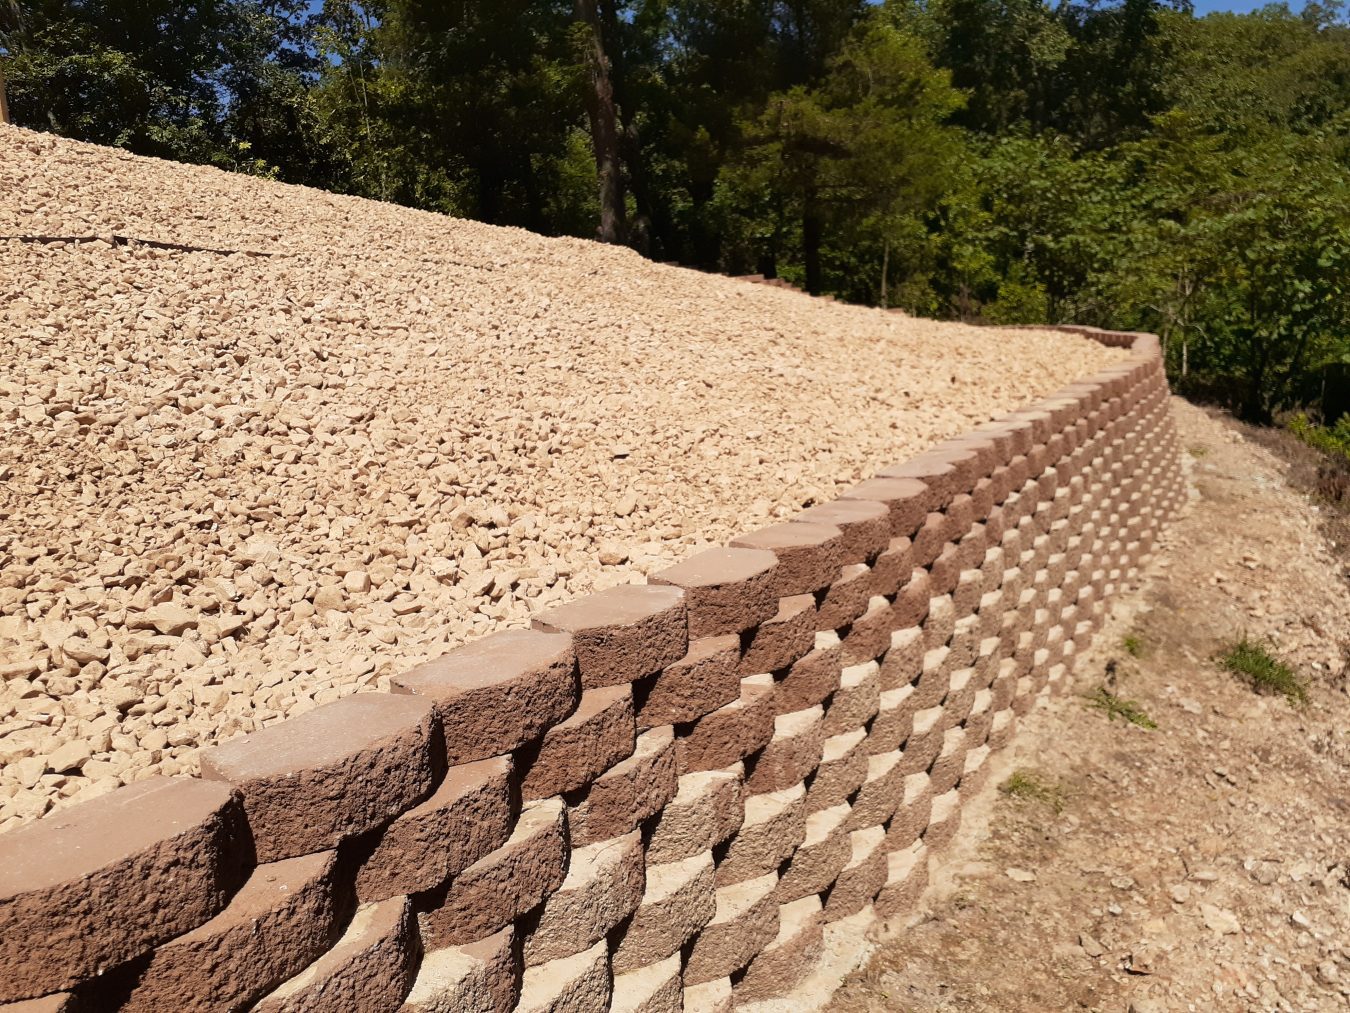 2 J's & Sons lawn and landscape retaining wall contractors